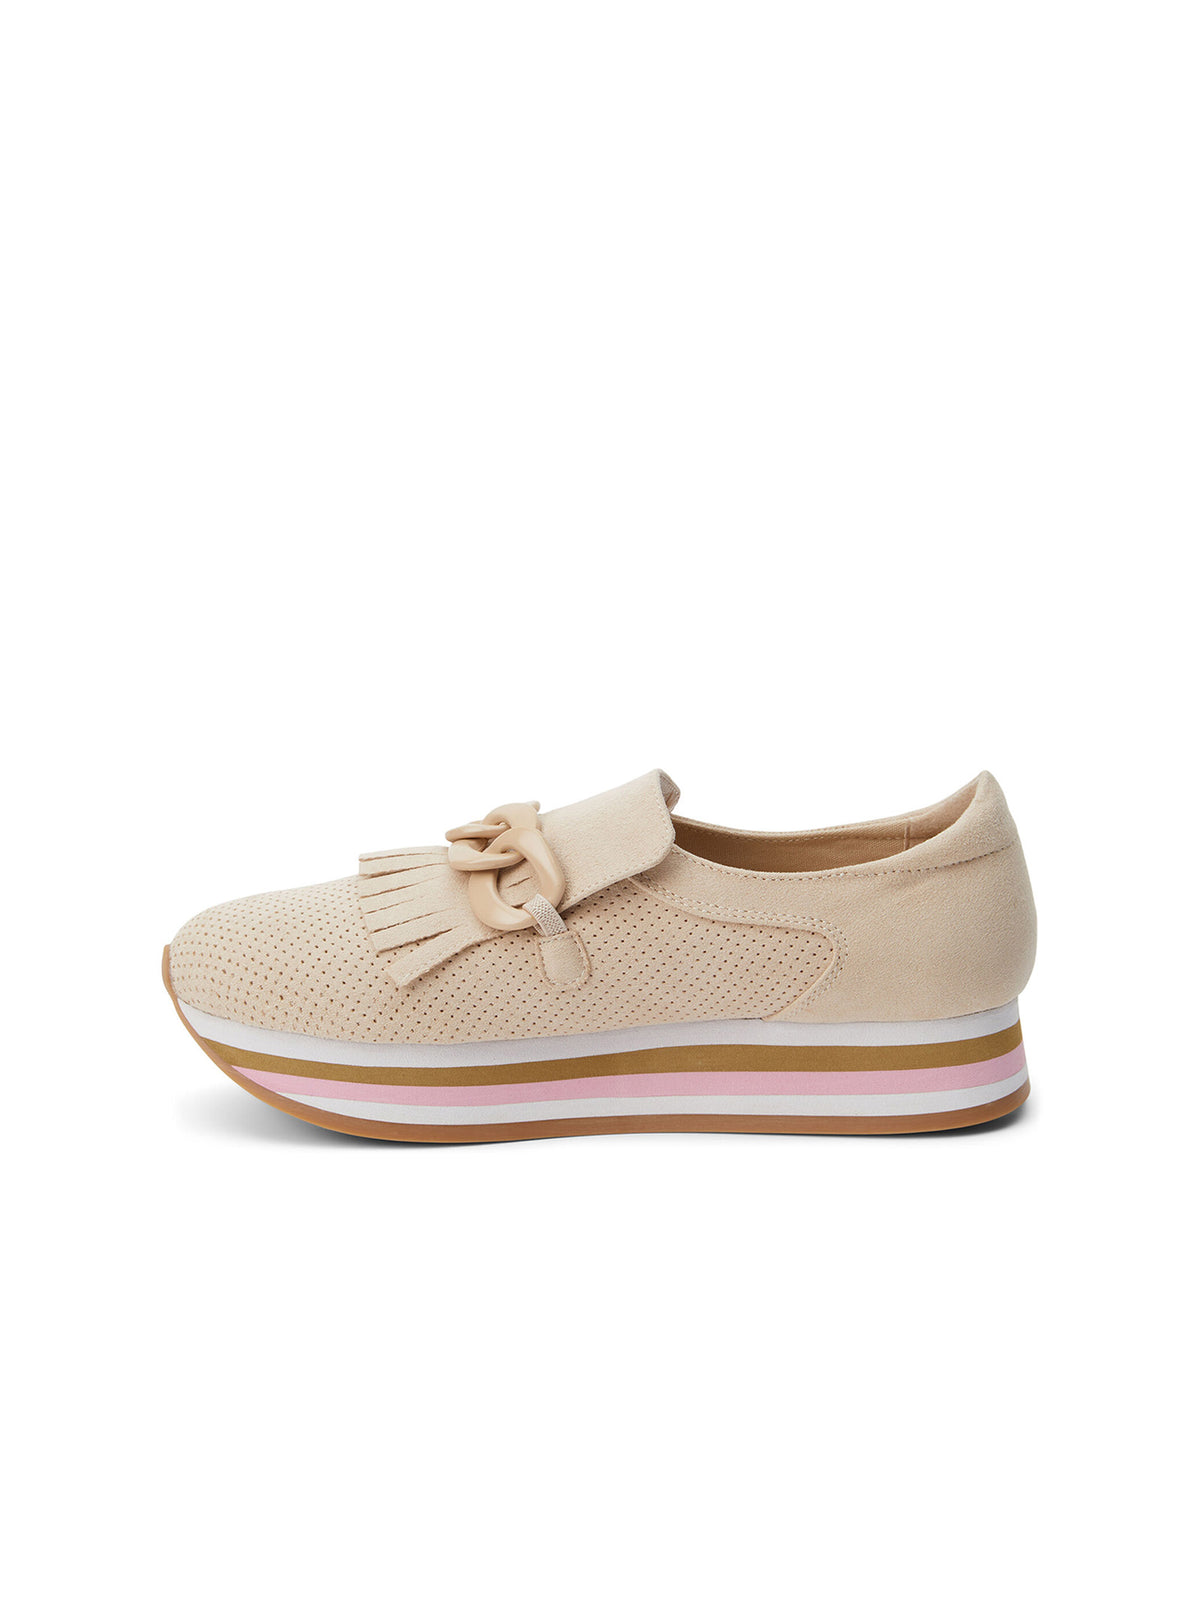 coconuts by matisse bess platform loafer in natural suede